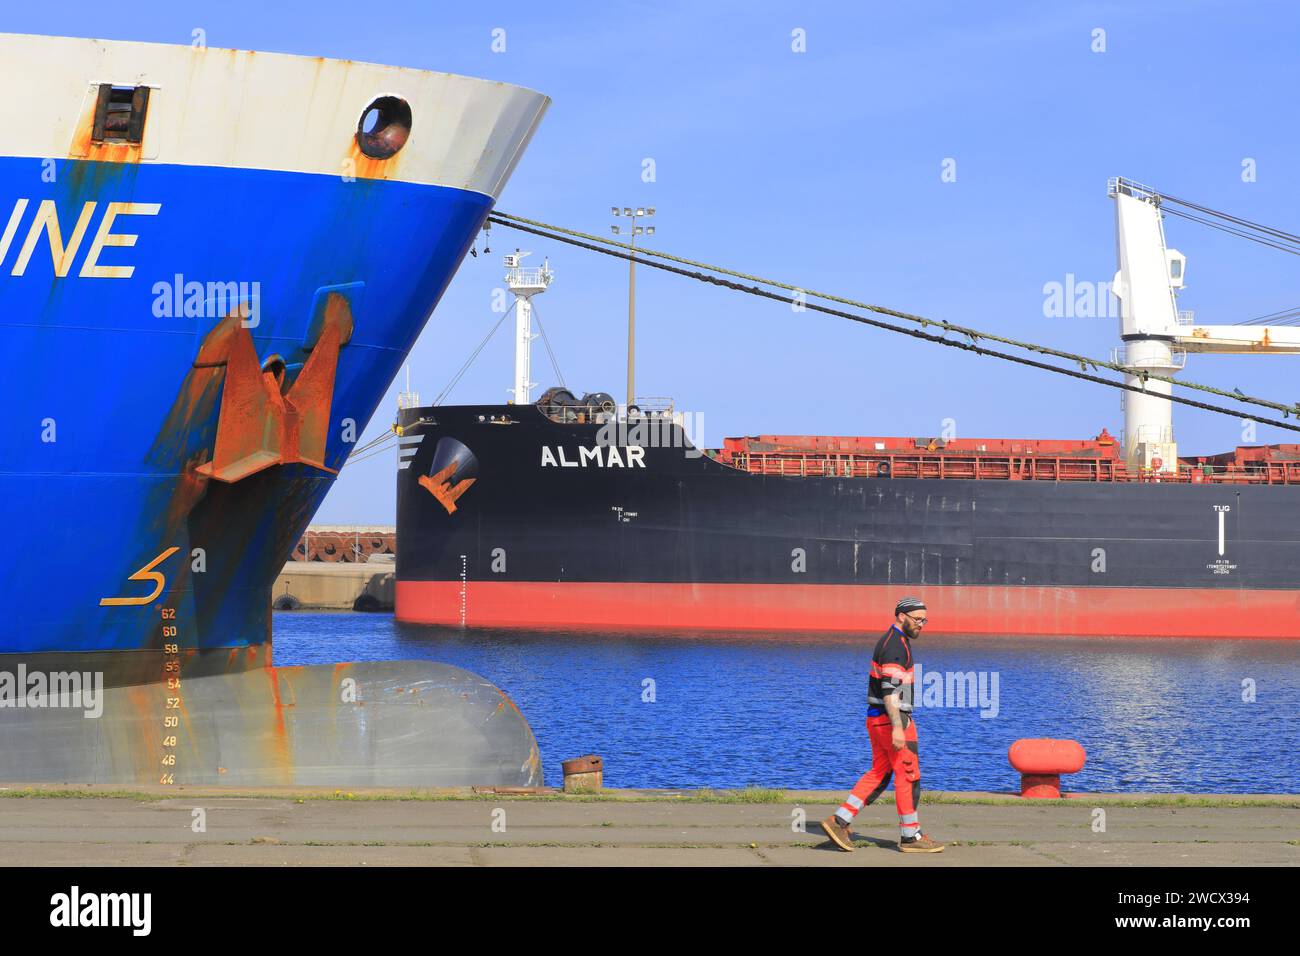 France, Nord, Dunkirk, Grand Port Maritime de Dunkerque (GPMD), loading of a ship Stock Photo